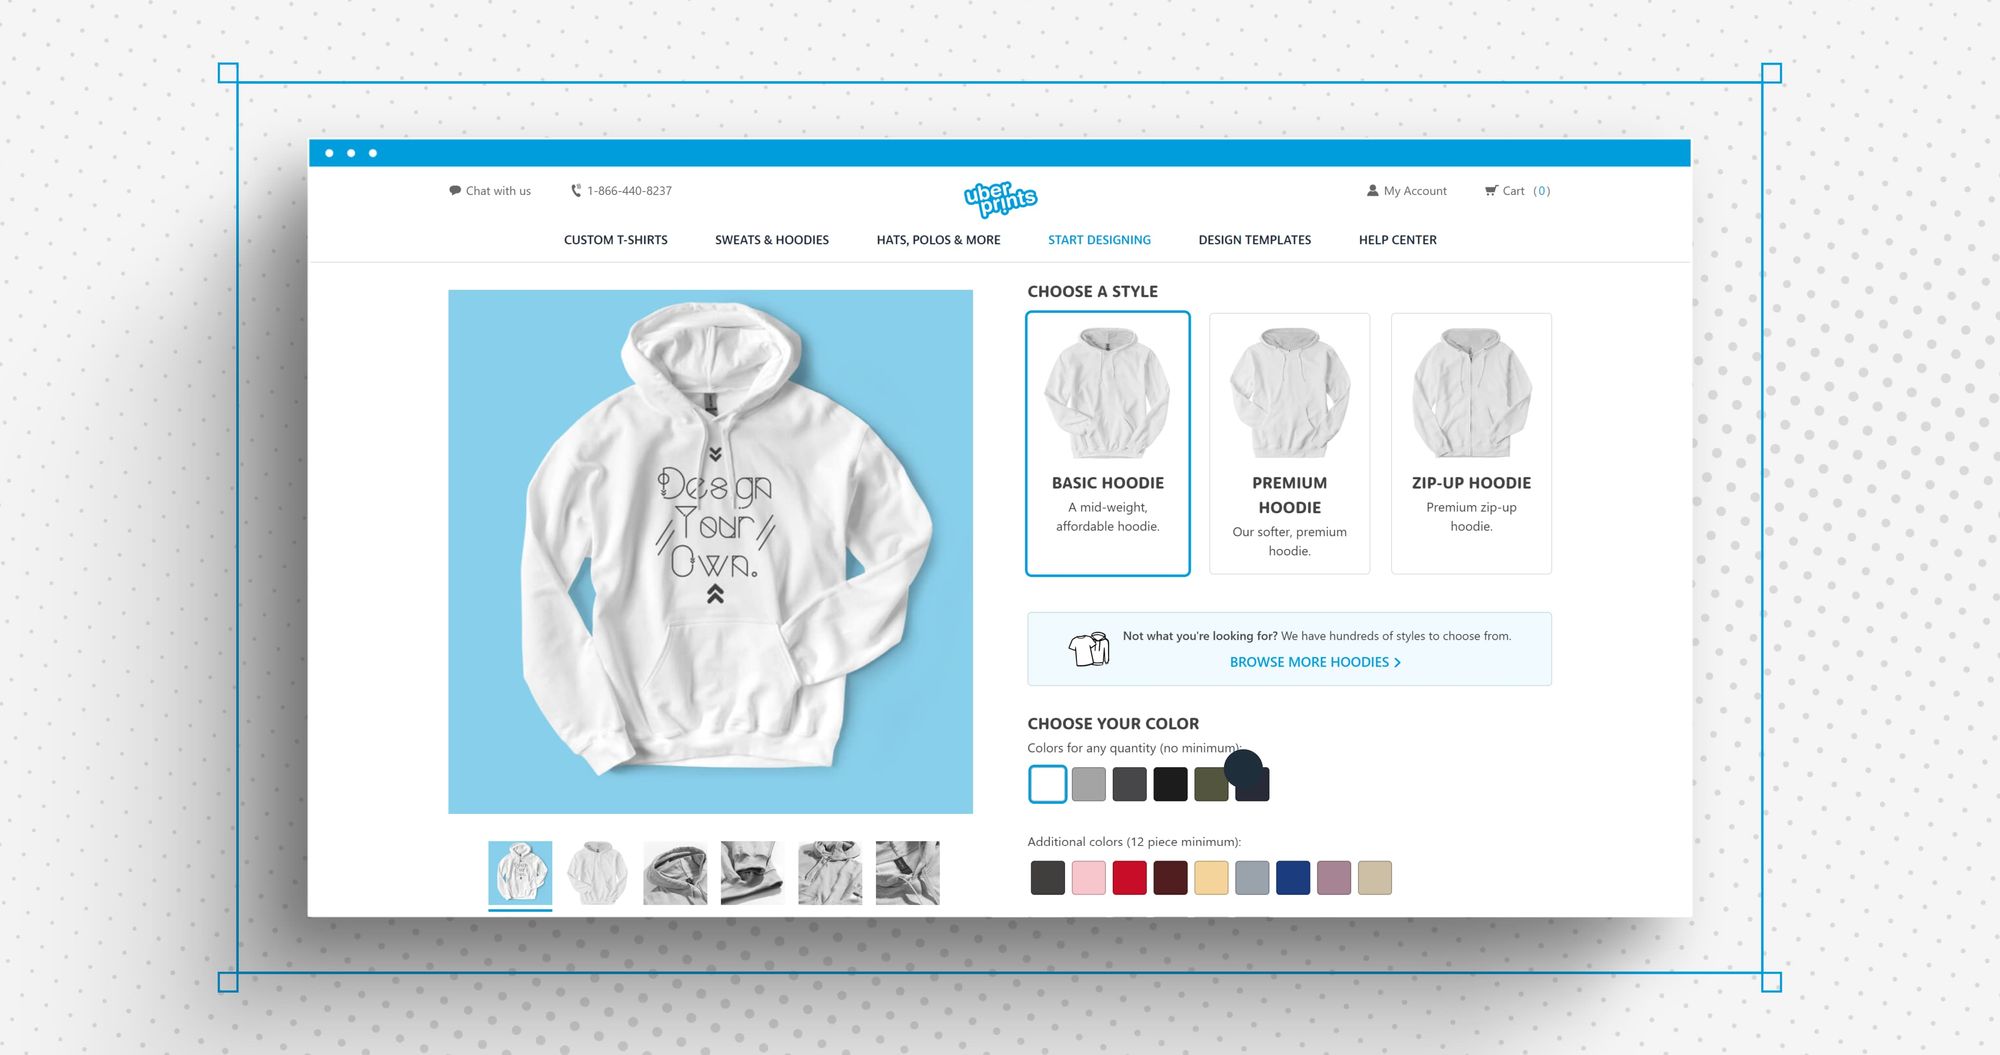 A screenshot which shows all the color options available for the Basic Hoodie and Premium Hoodie.